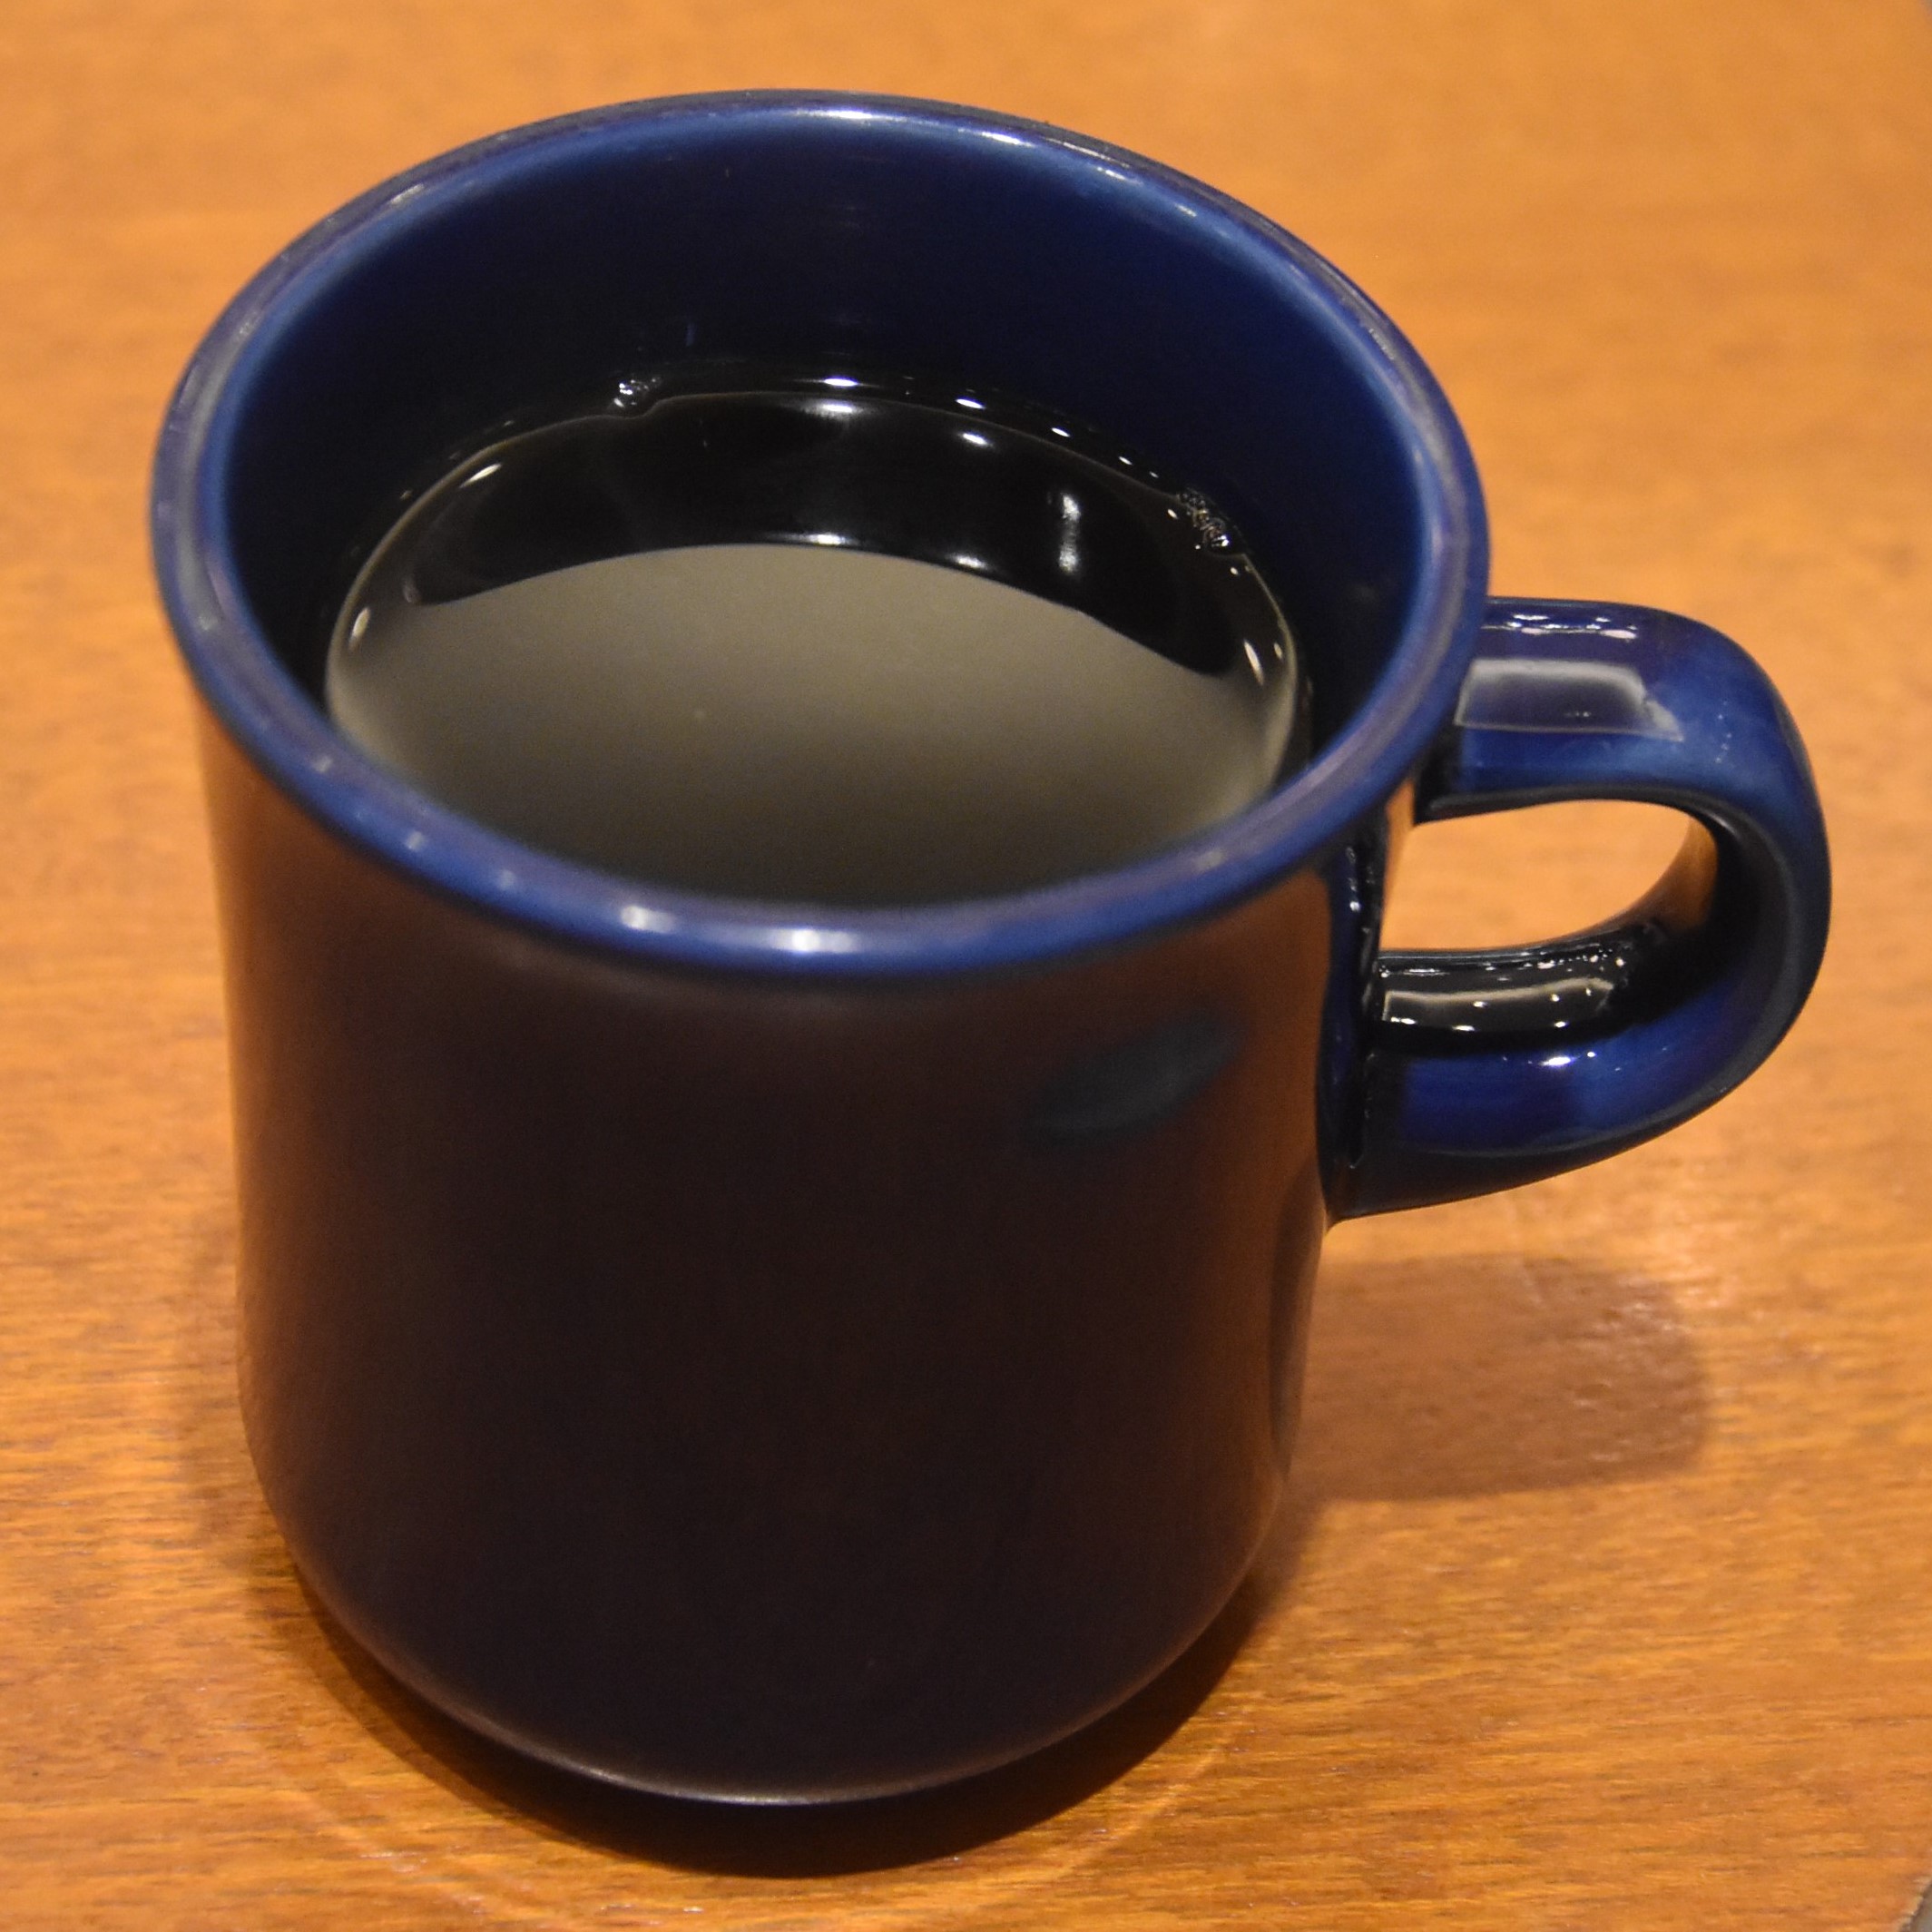 A lovely single-origin Ethiopian pour-over from Ogawa Coffee at Kyoto Station.